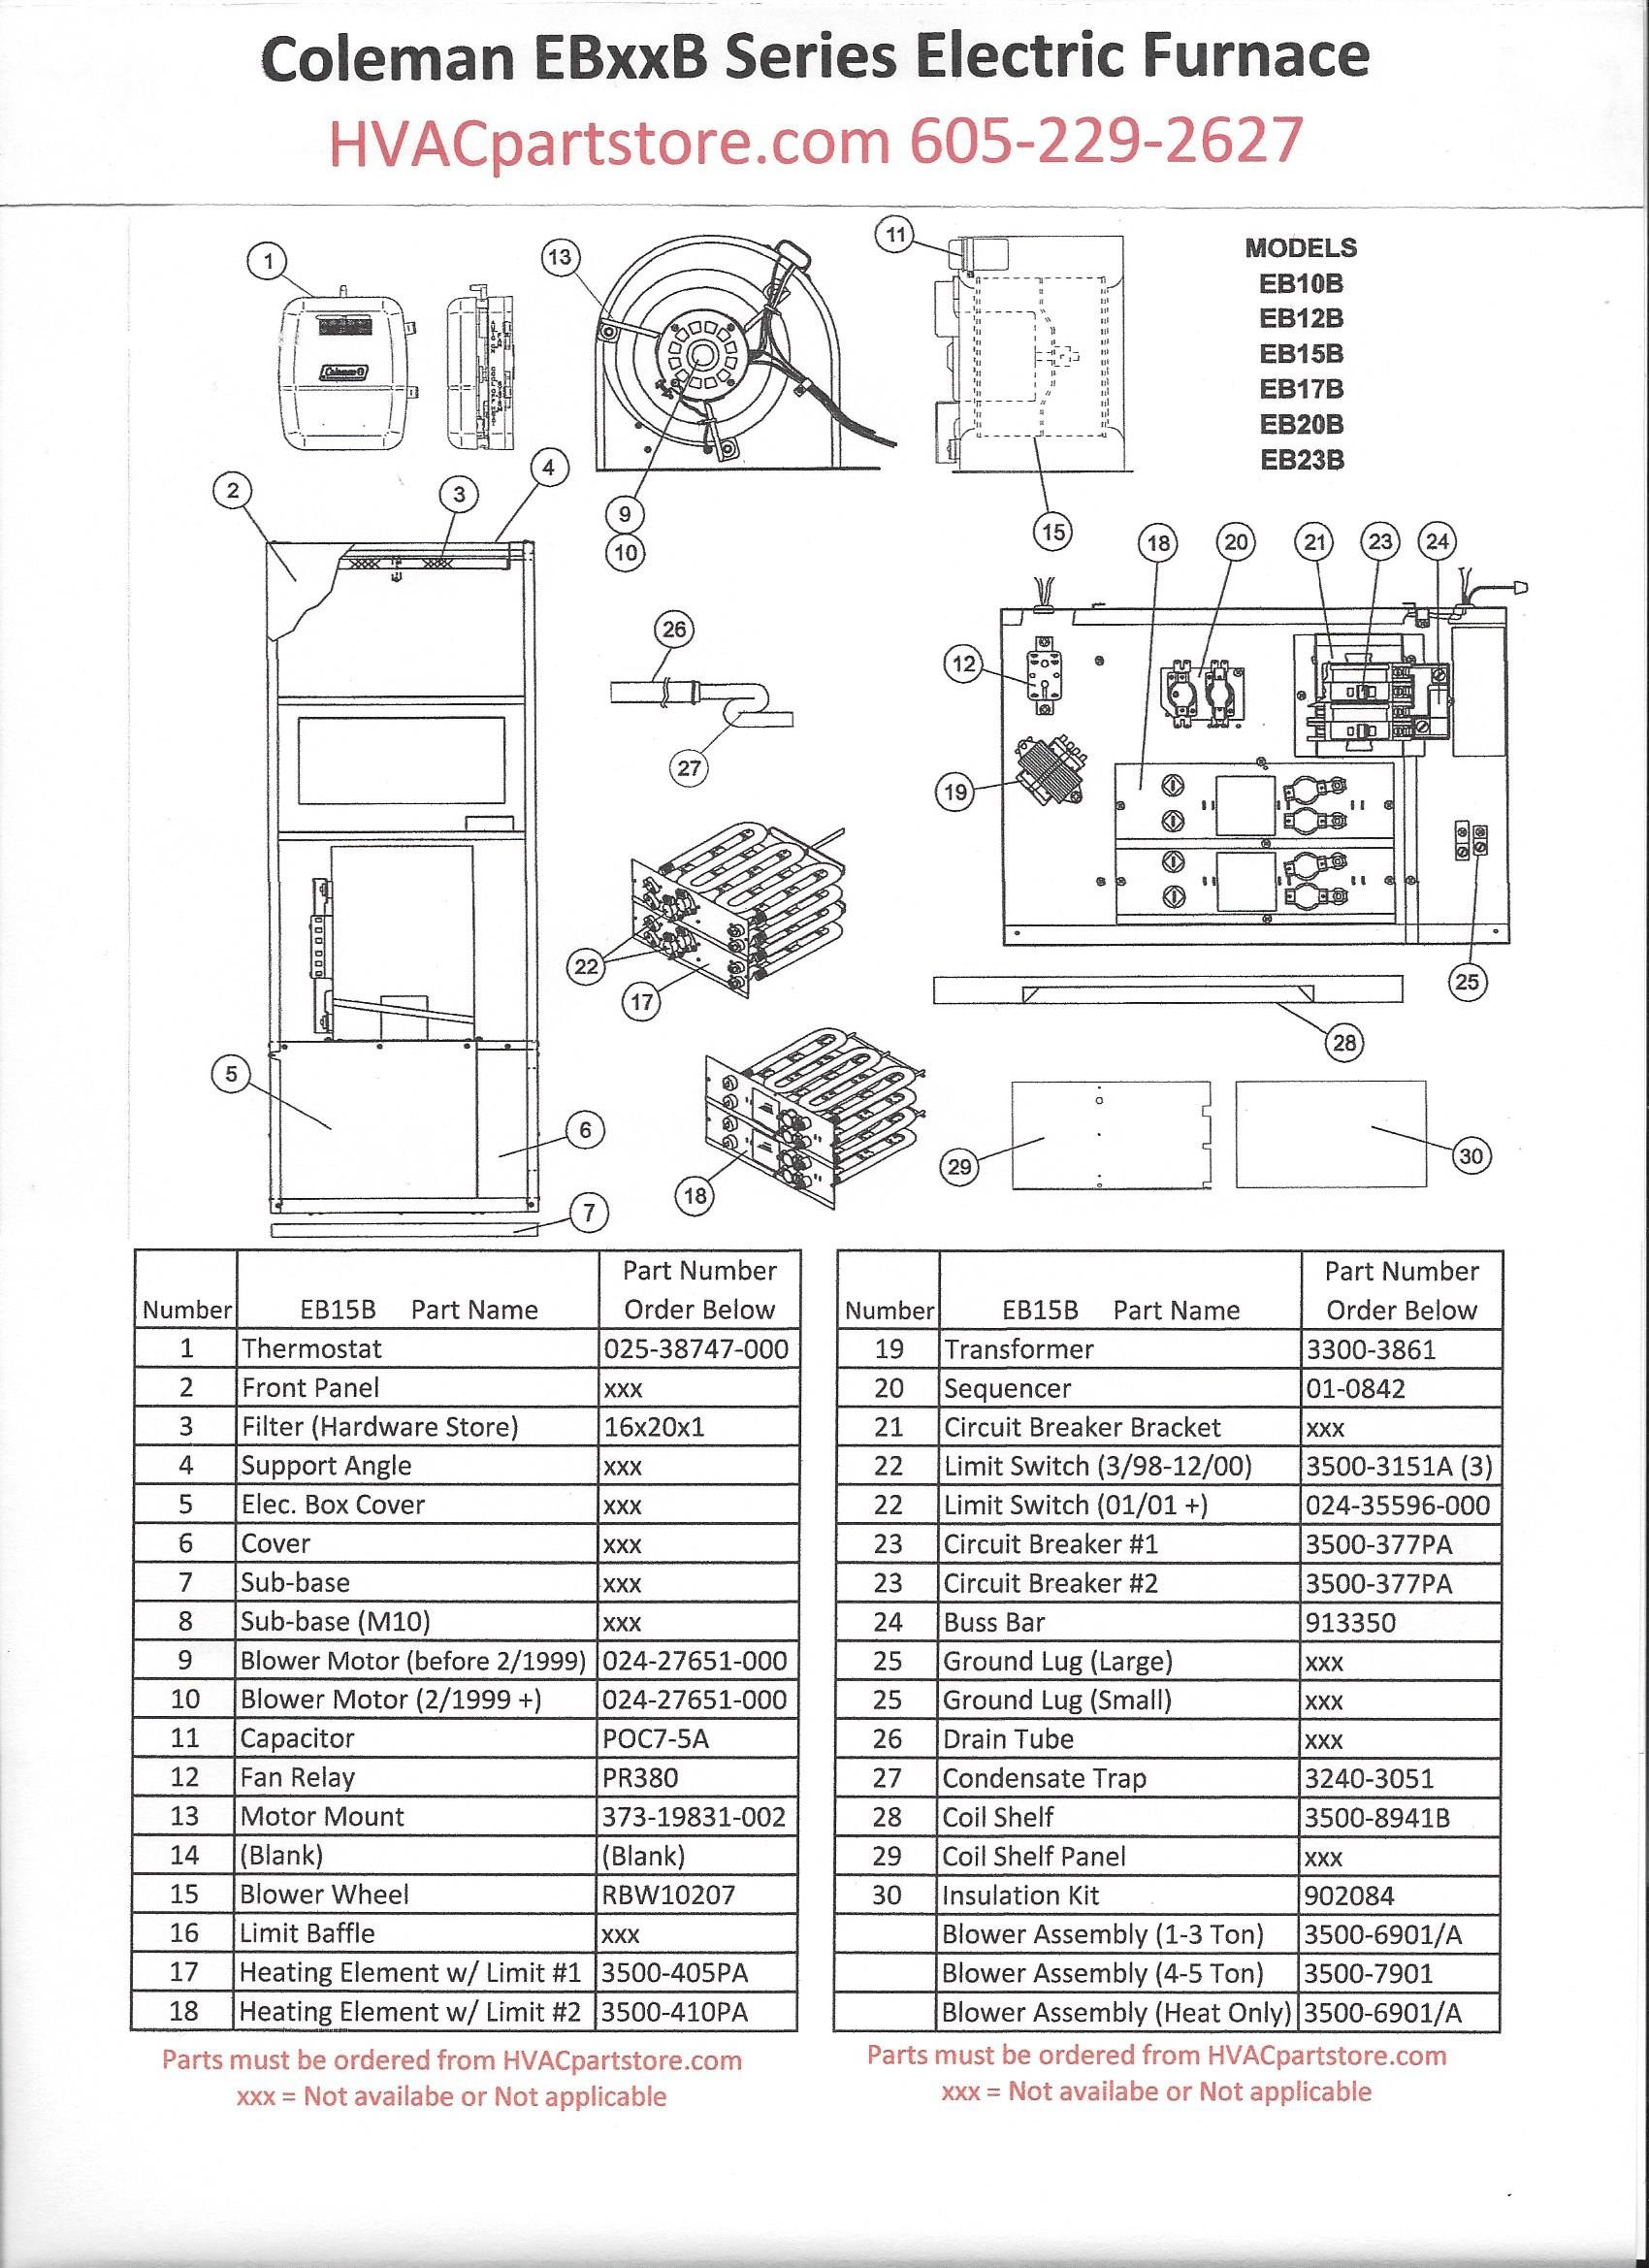 Beautiful Intertherm Electric Furnace Wiring Diagram 20 For Boss Beauteous Diagrams